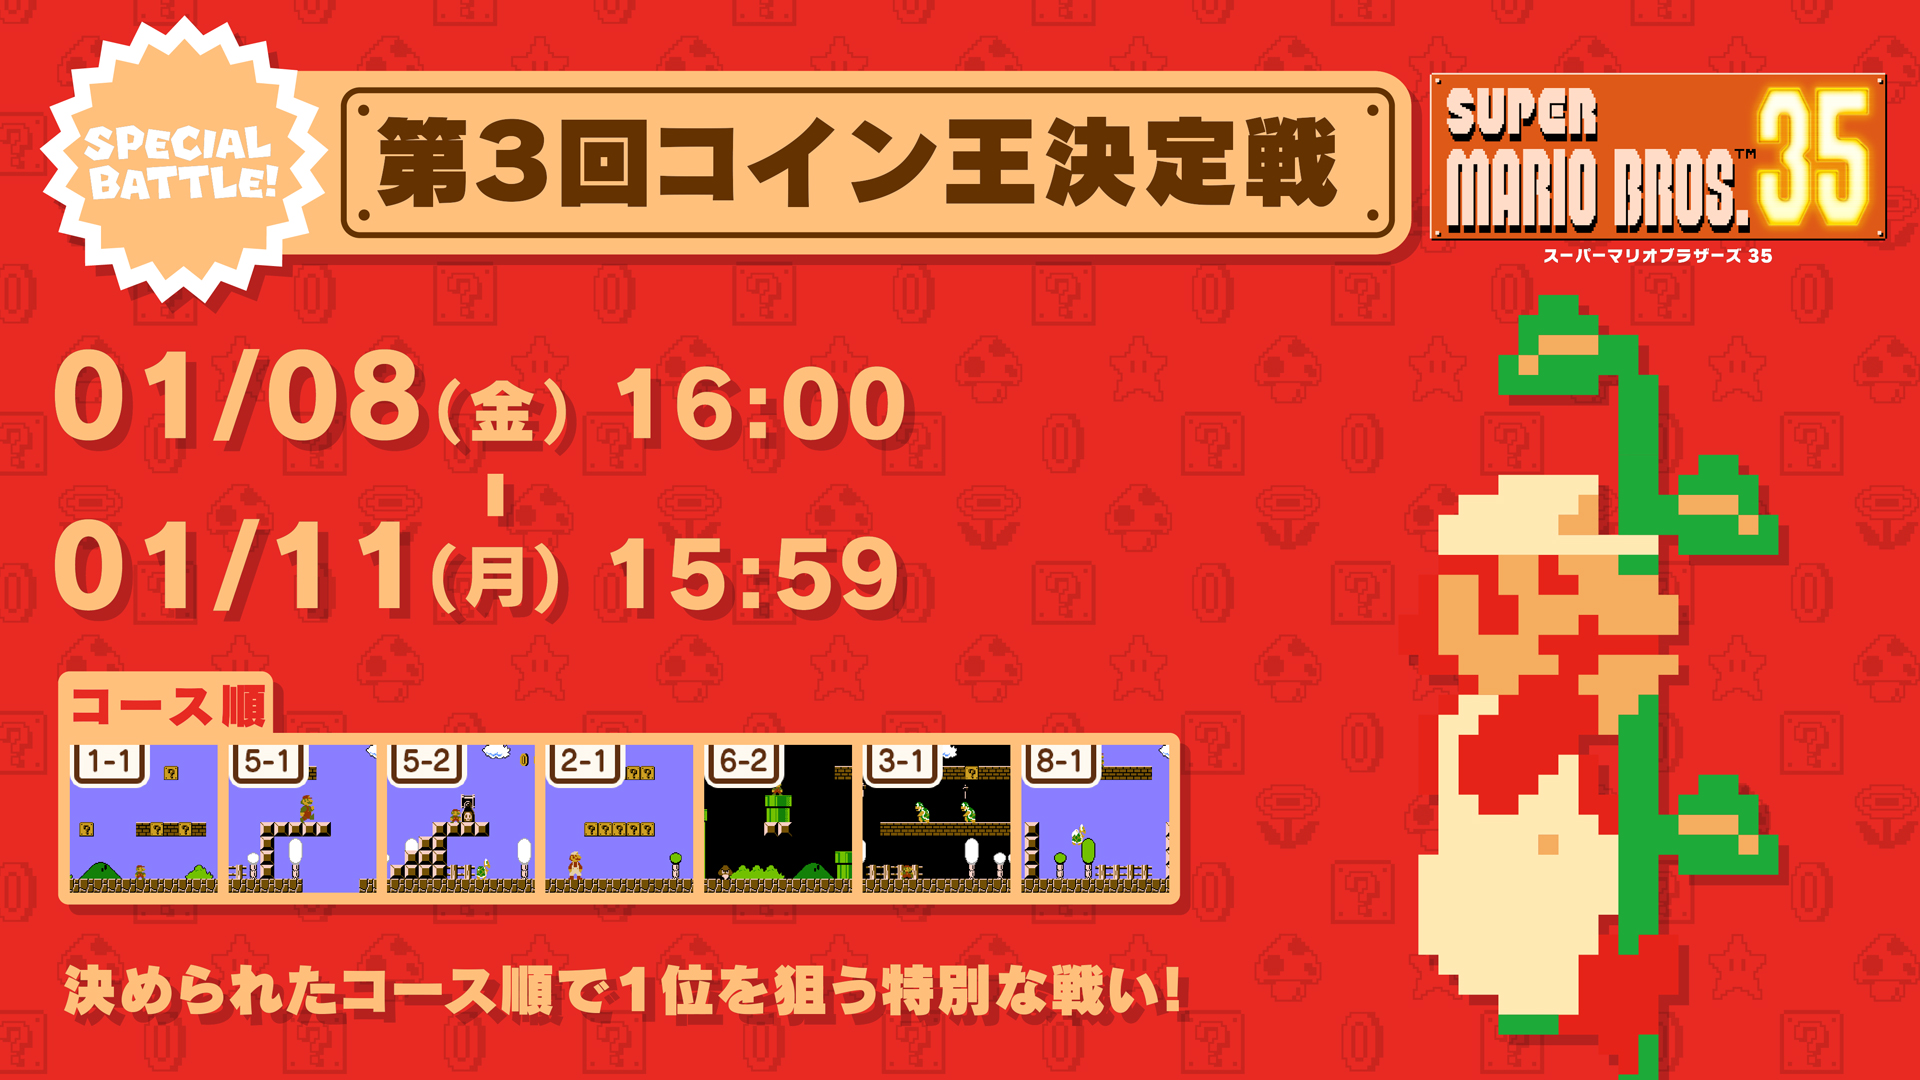 Super Mario Bros 35 New Special Battle Event Announced For January 8